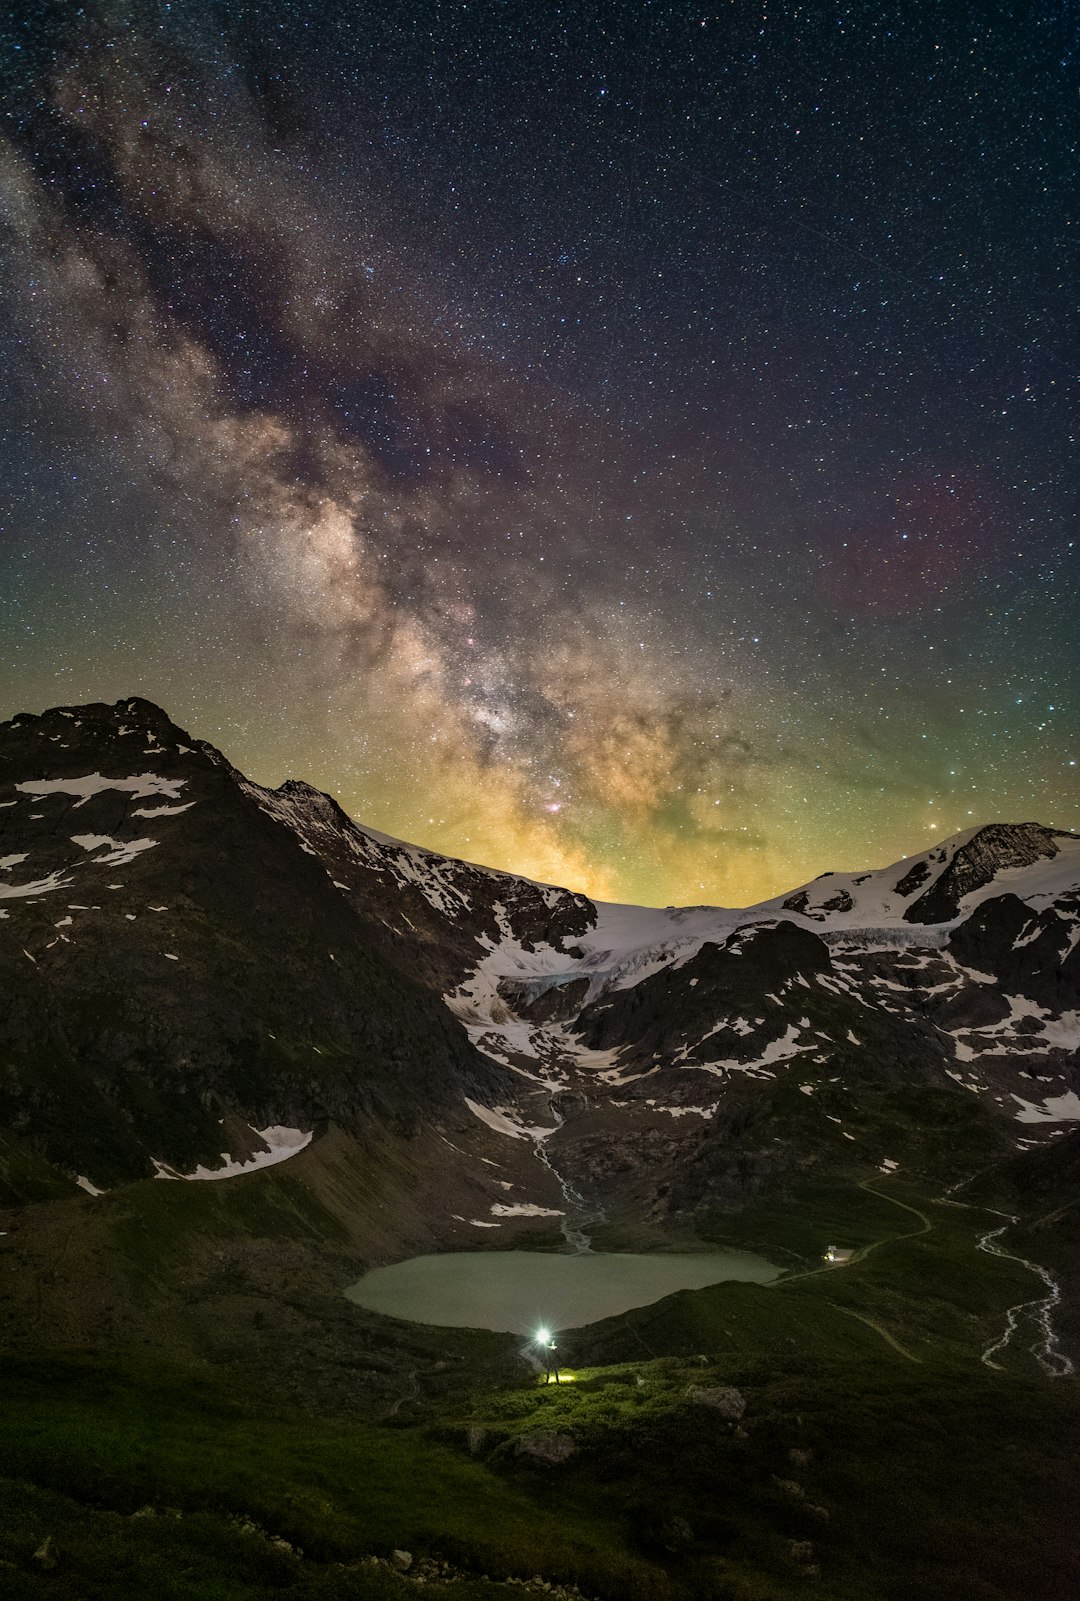 lake in the middle of mountains under starry night